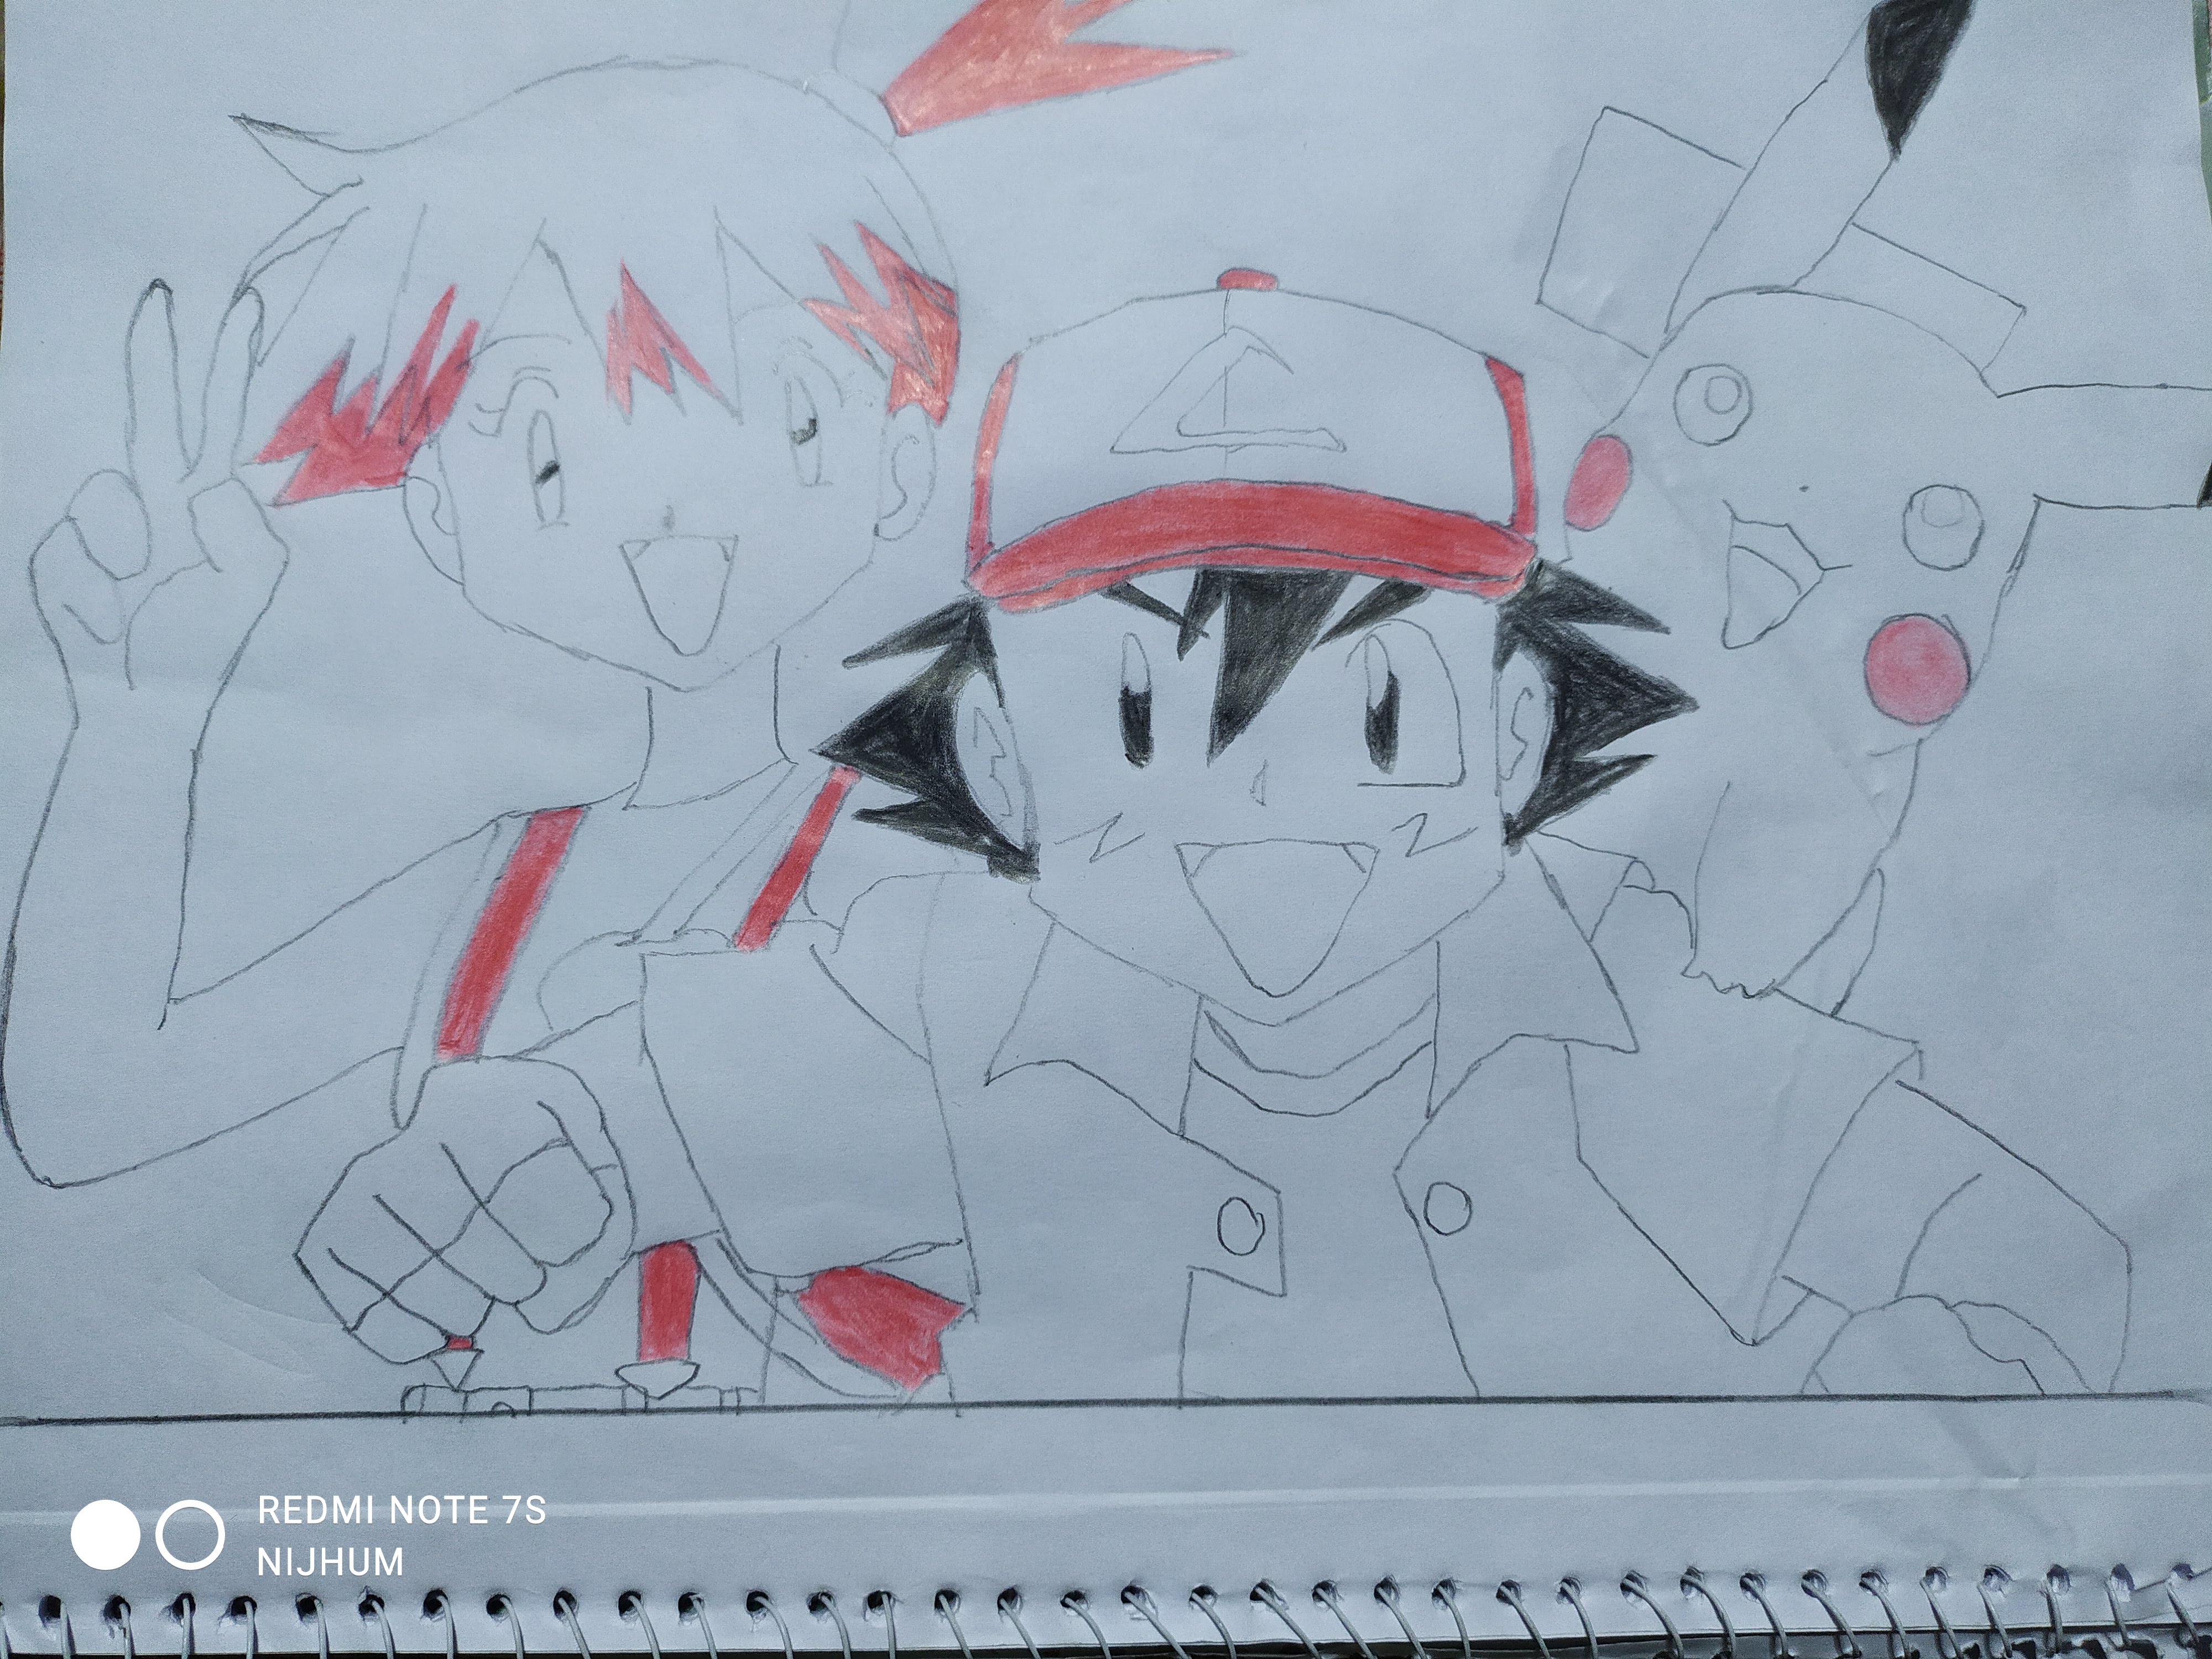 How to draw Ash and Pikachu | Pokémon | Pikachu and Ash step by step -  YouTube | Pikachu drawing, Pokemon drawings, Easy drawings